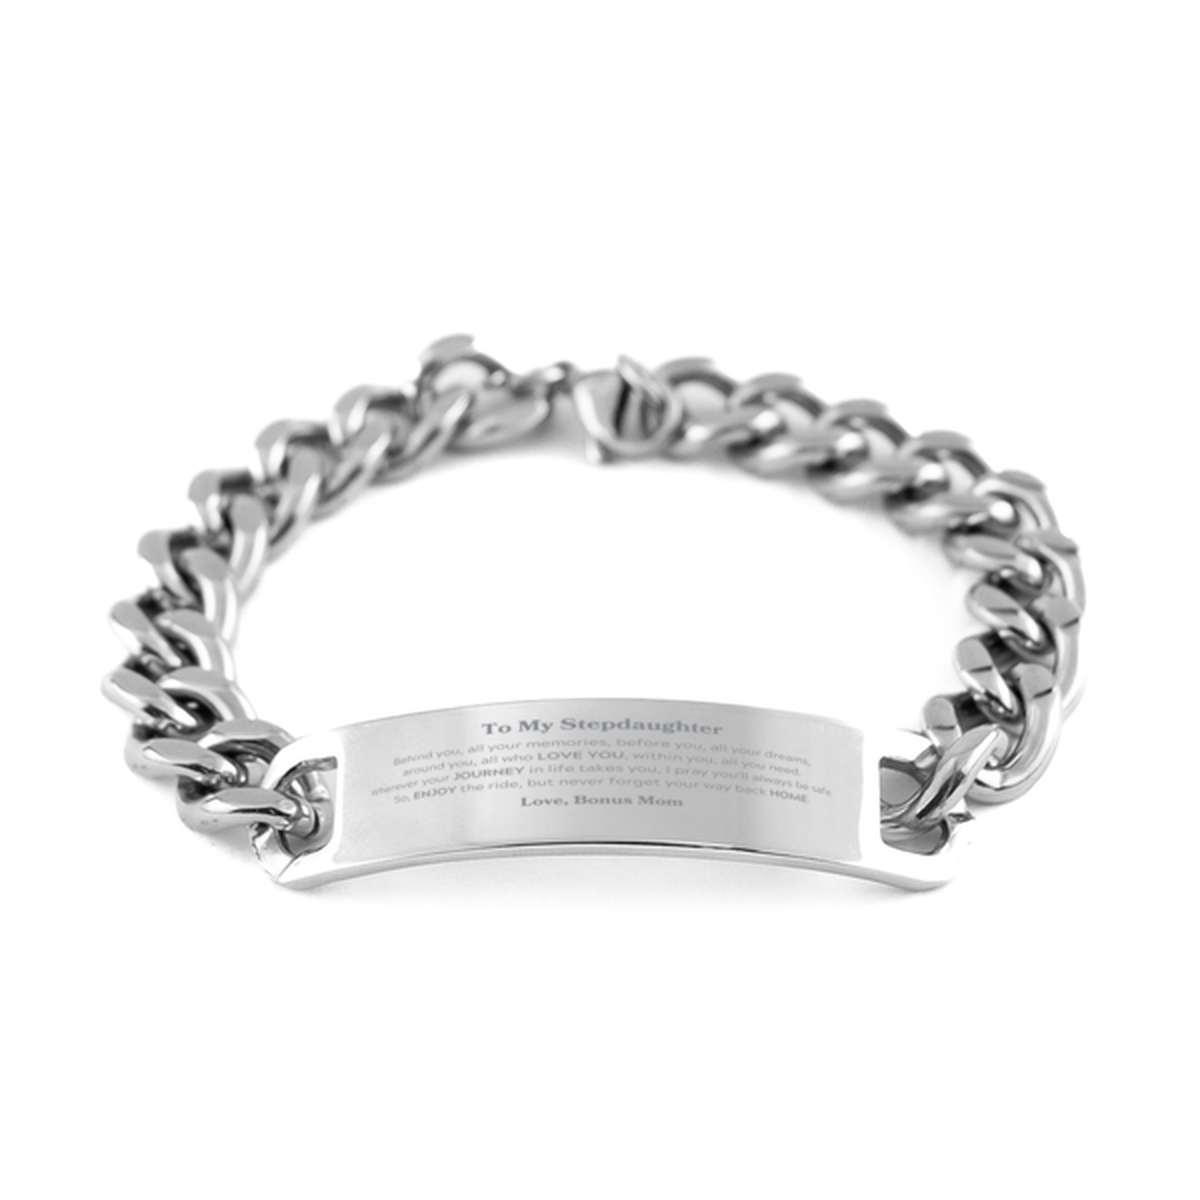 To My Stepdaughter Graduation Gifts from Bonus Mom, Stepdaughter Cuban Chain Stainless Steel Bracelet Christmas Birthday Gifts for Stepdaughter Behind you, all your memories, before you, all your dreams. Love, Bonus Mom